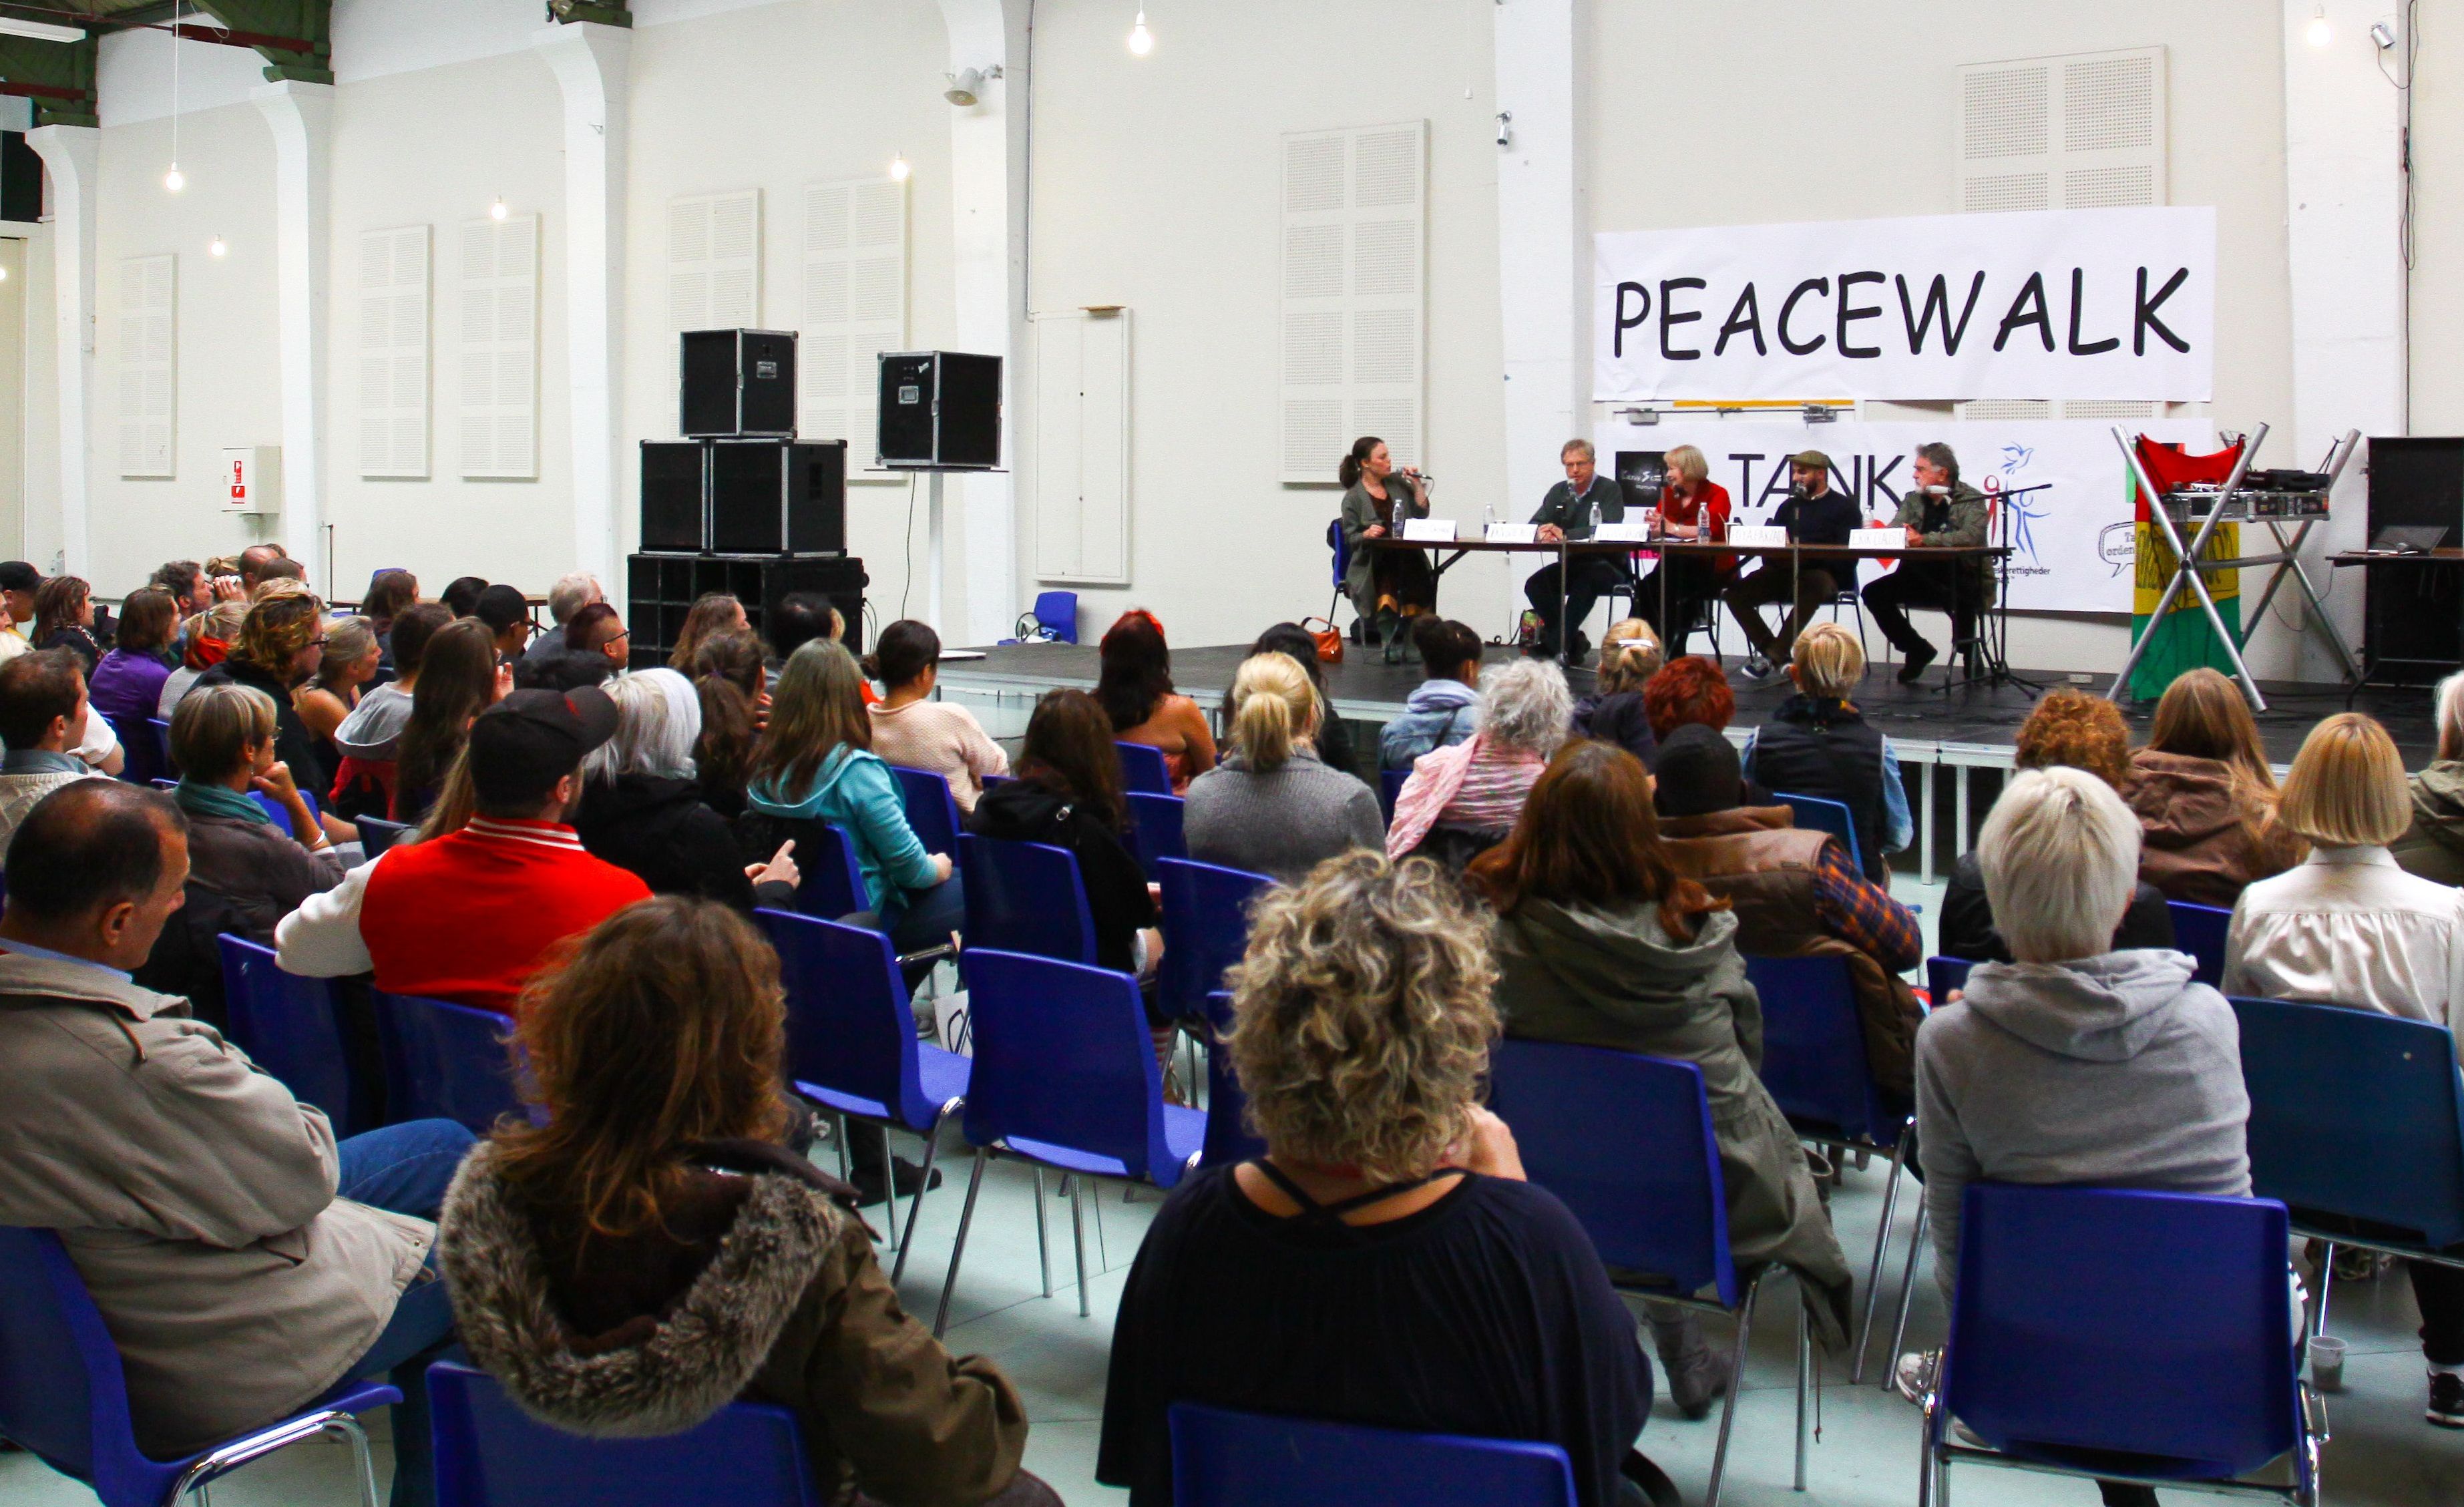 A peace rally at the public culture and sports hall in Nørrebro at the end of PeaceWalk September 21, 2013, on International Day of Peace, included performance and a panel discussion on peace.